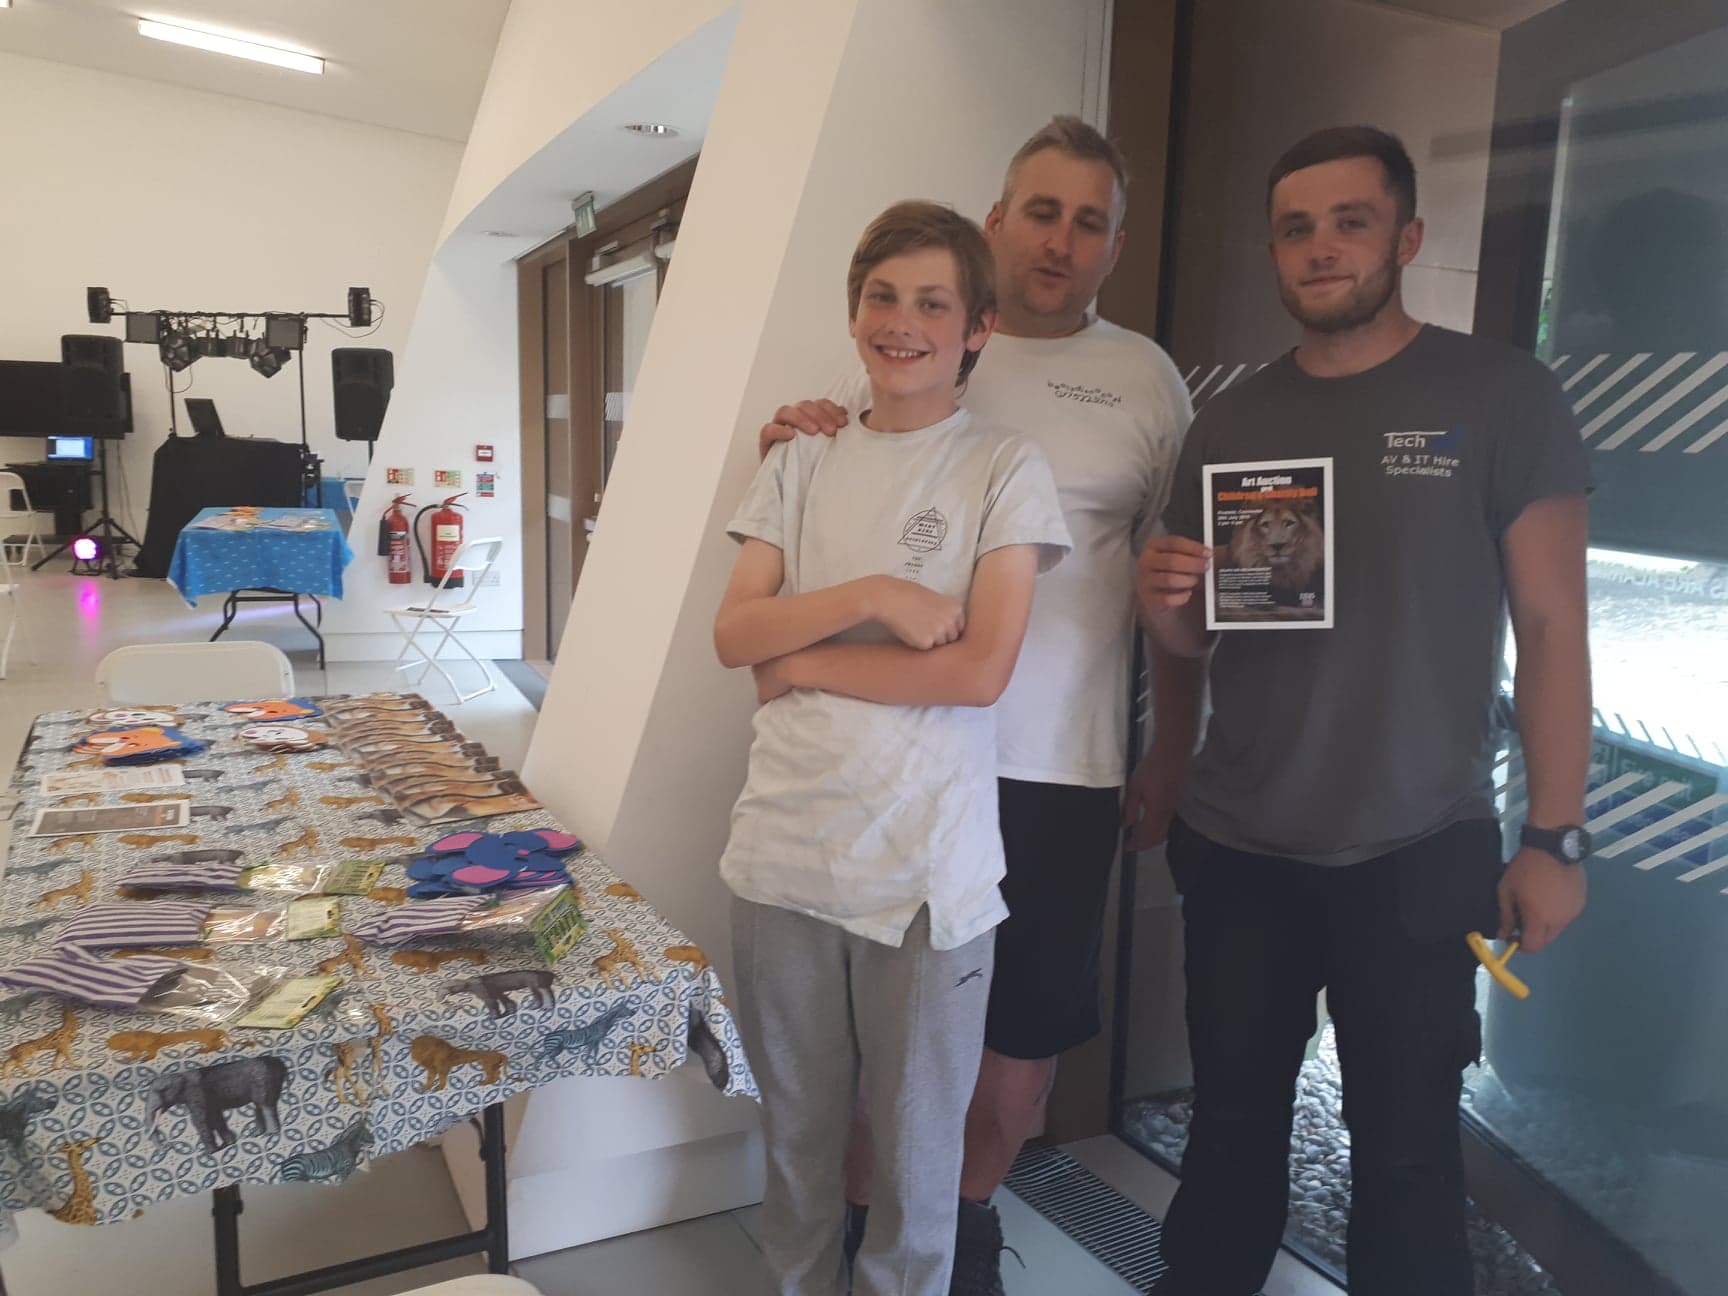 OWAP AR fundraiser 20 JULY 2018 firstsite gallery colchester ukWITH SIMON DJ  HIS SON VIGGO AND LEE TECHIE SET UP AUCTION DISCO SECTION OF THE FIRSTSITE GALLERY ROOMS.jpg